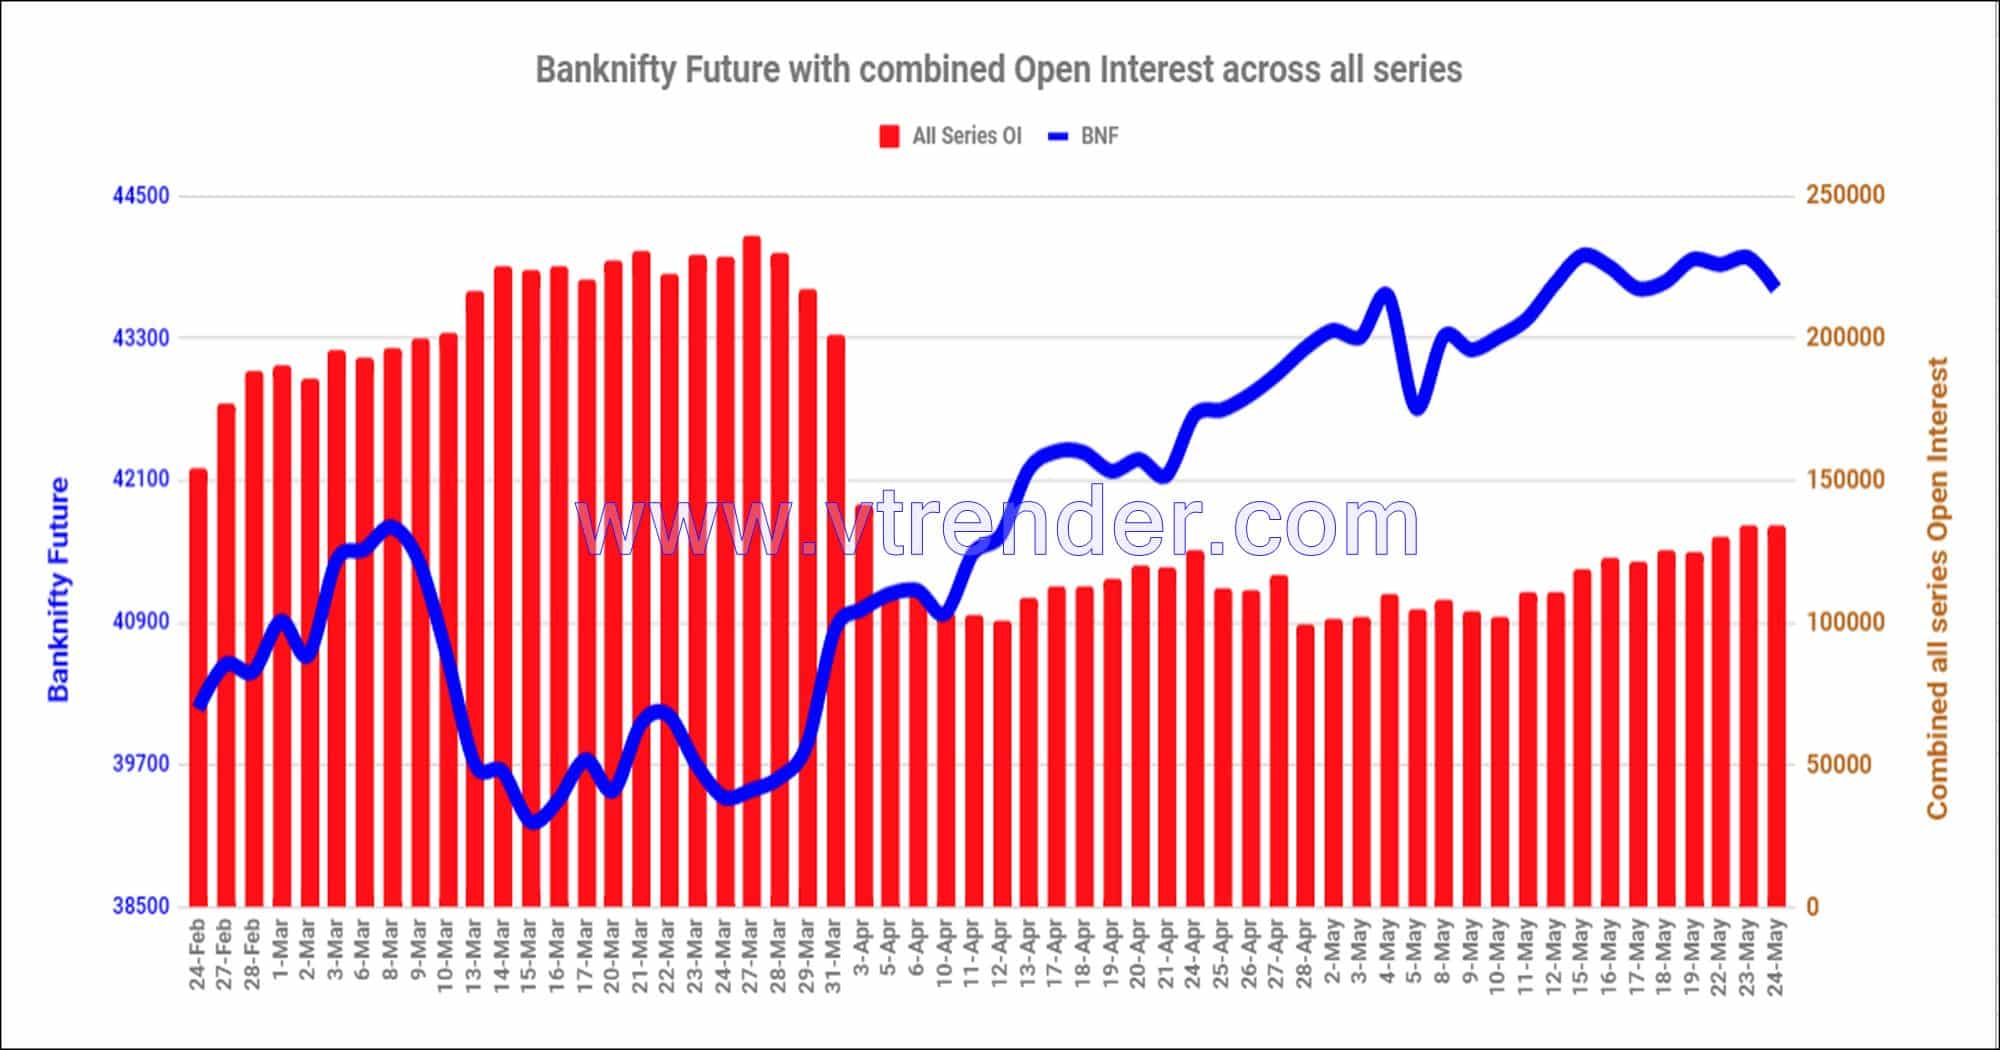 Bnf24May Nifty And Banknifty Futures With All Series Combined Open Interest – 24Th May 2023 Banknifty, Nifty, Open Interest